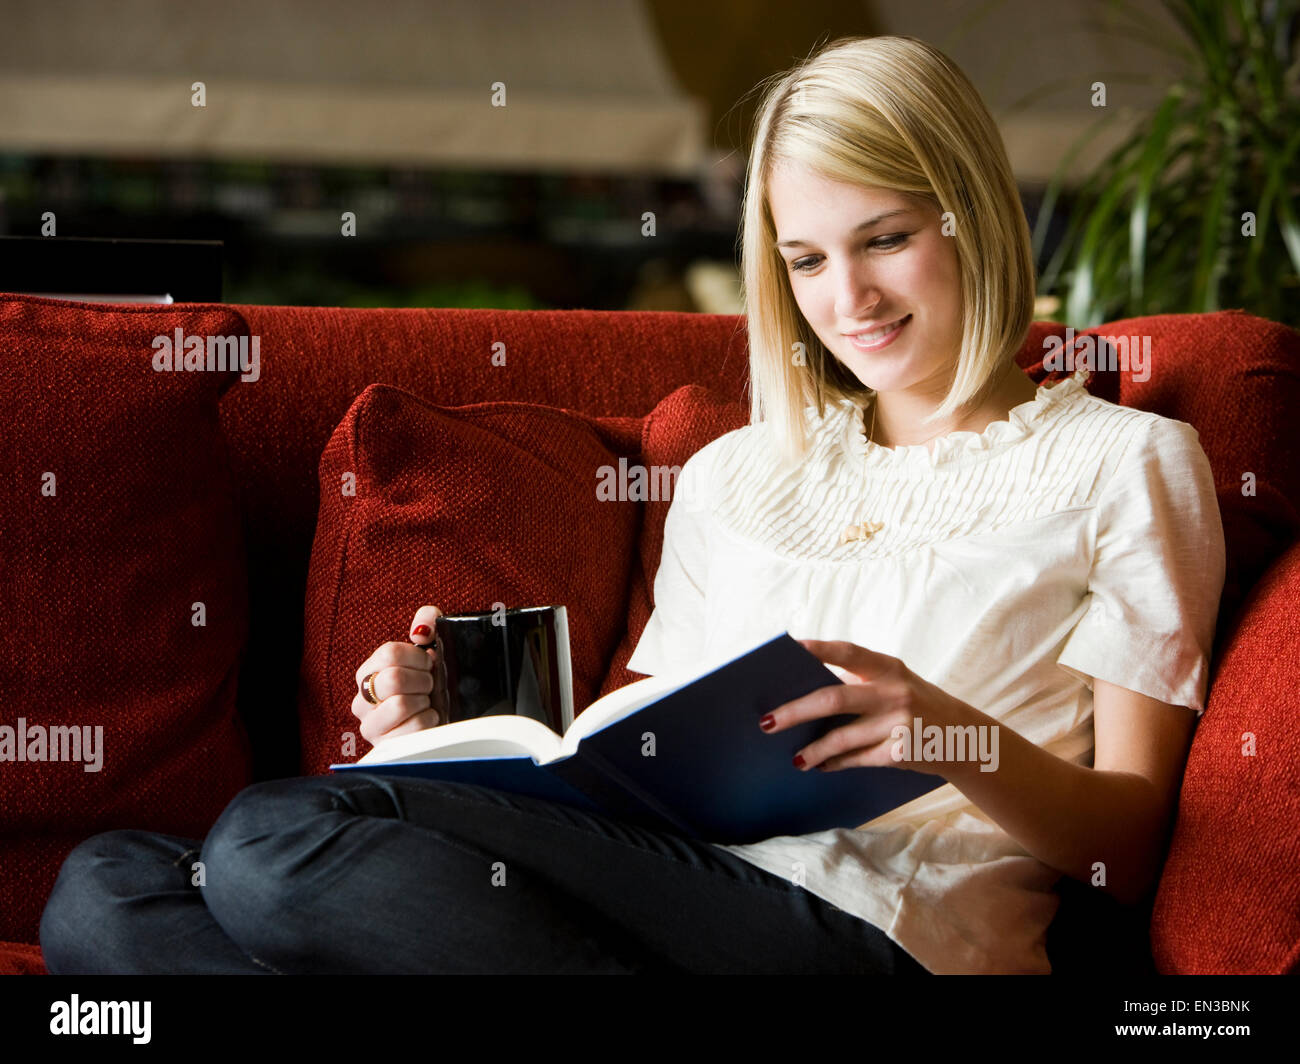 woman reading on the couch Stock Photo